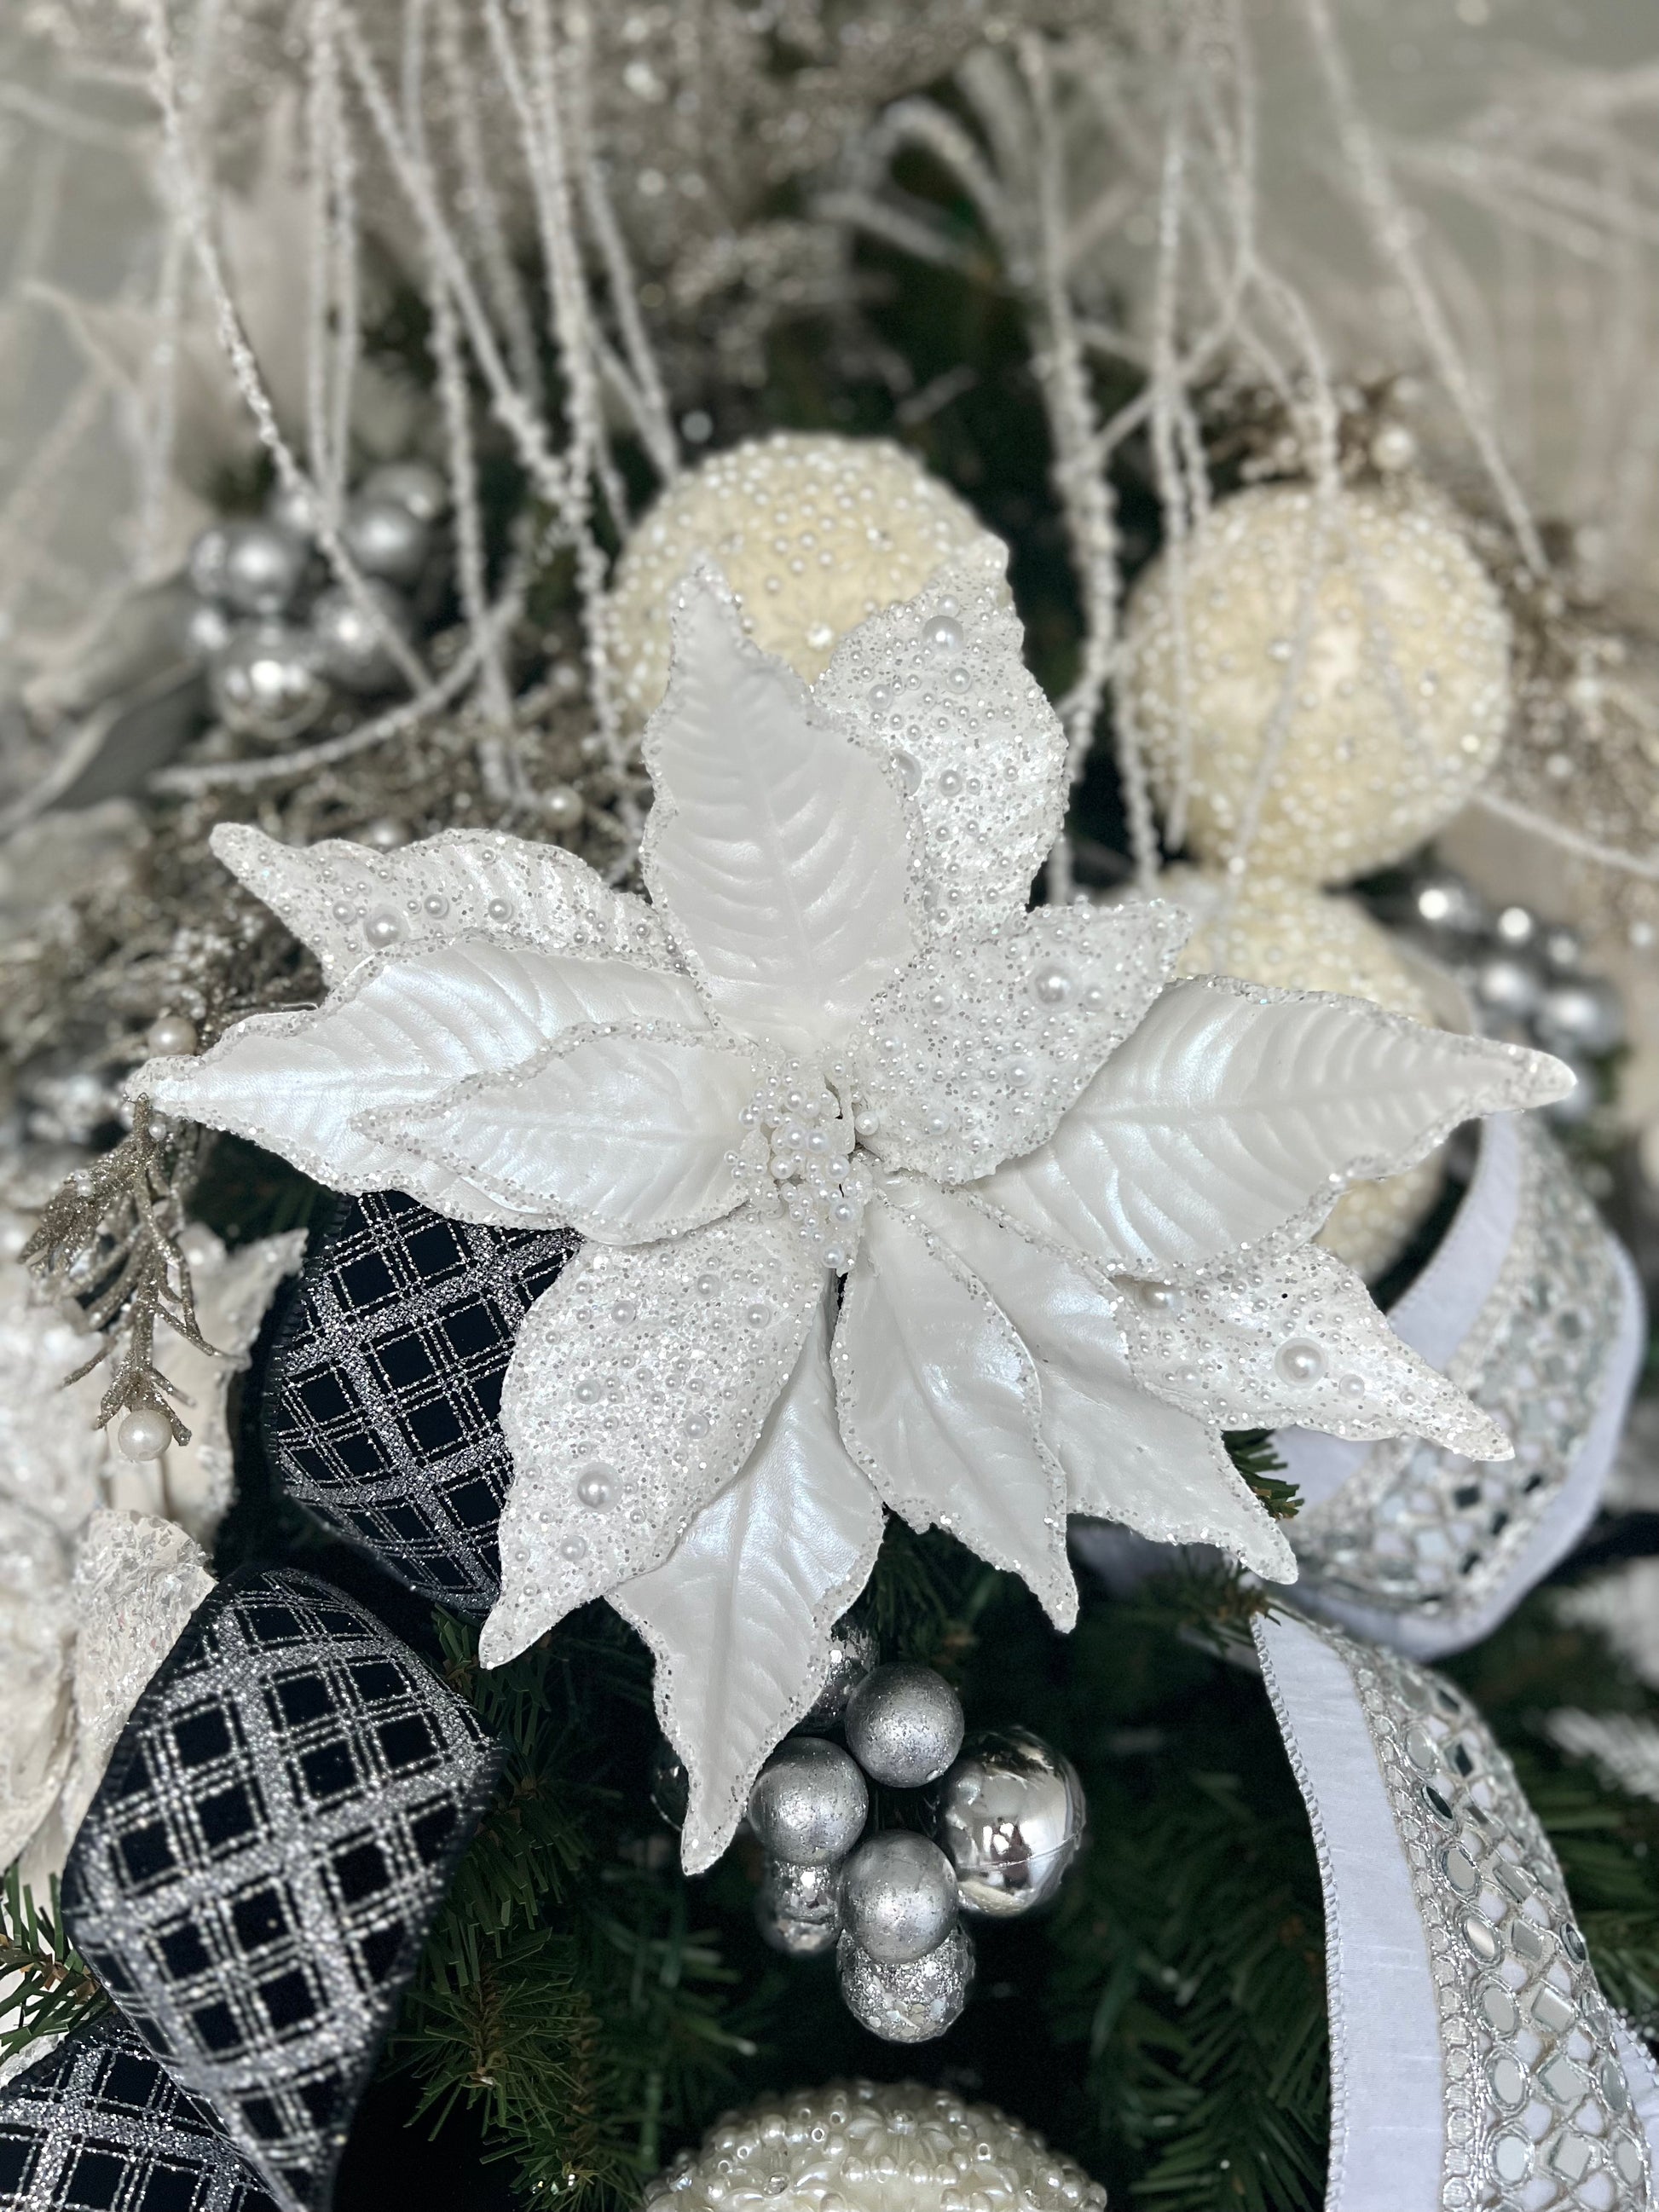 White poinsettia stem with pearl beads dusted across the petals.  Glam Christmas decor.